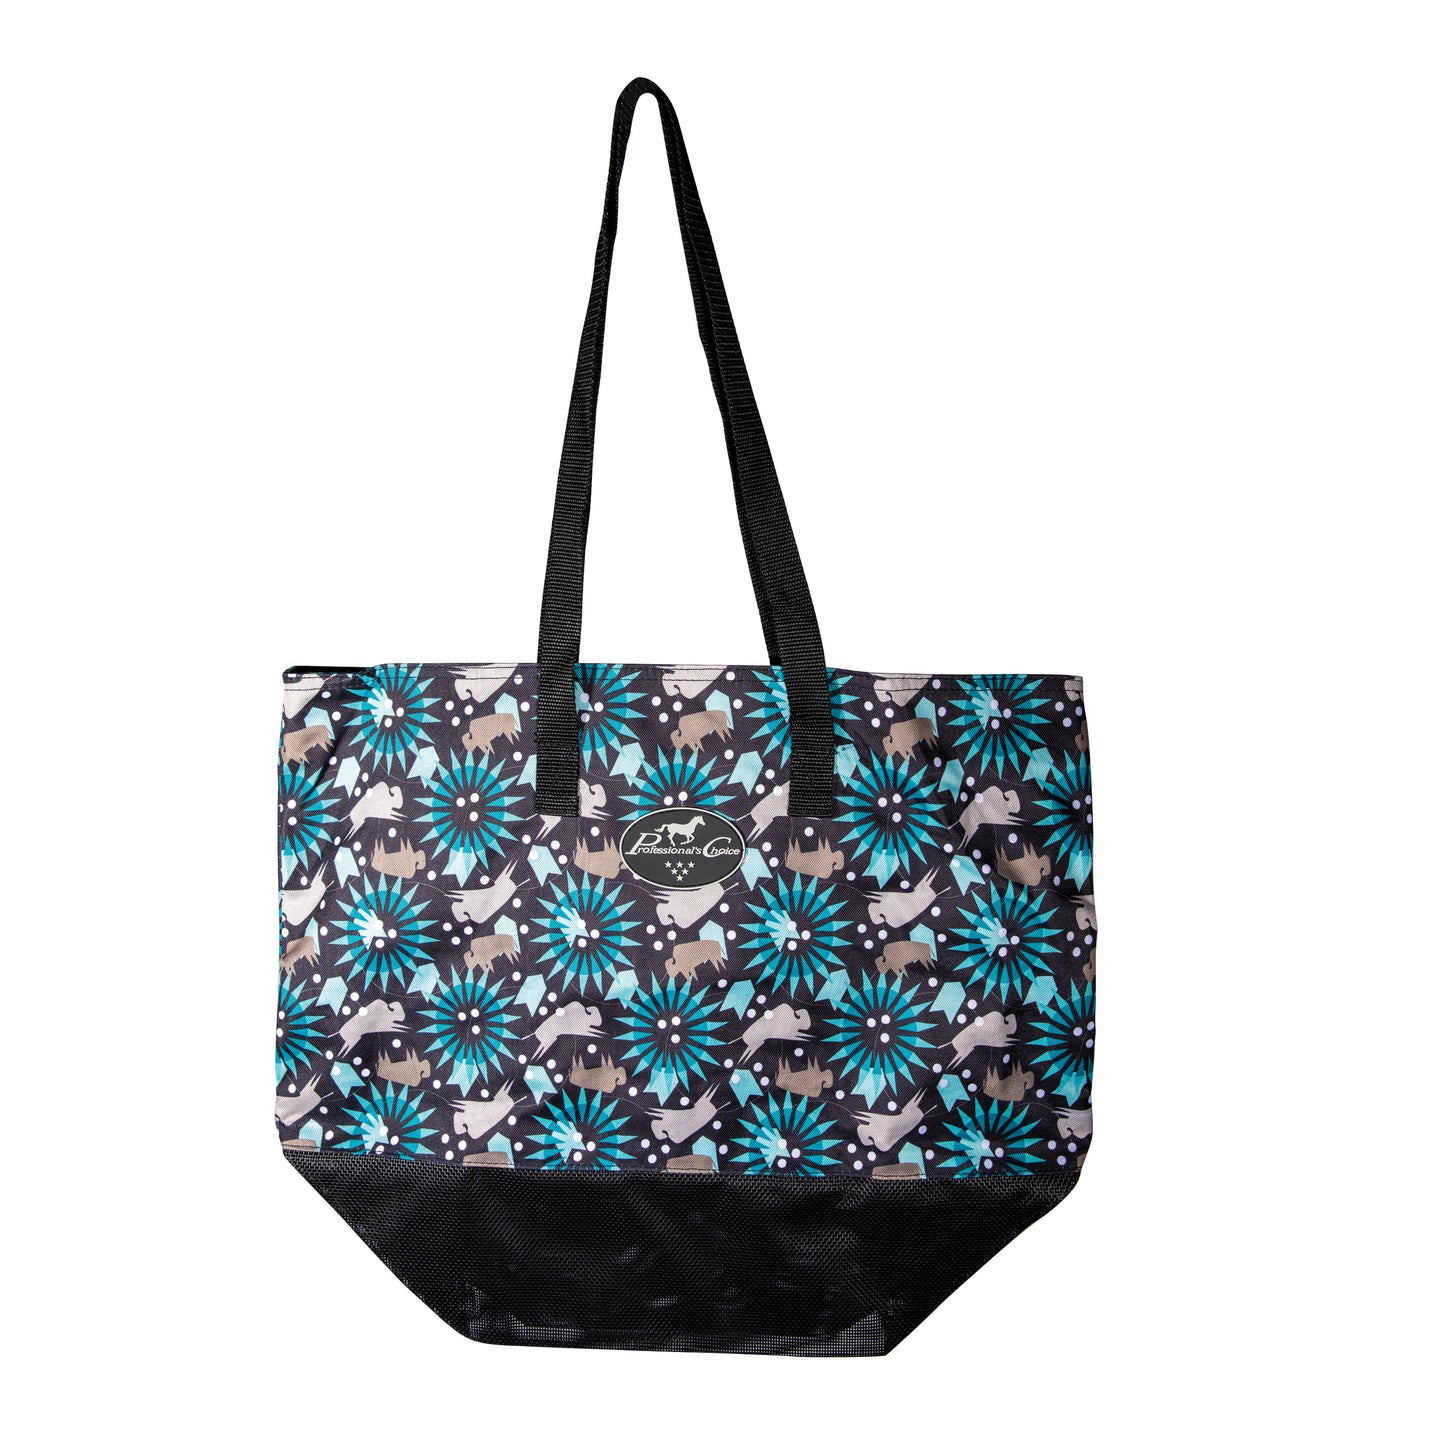 Professional's Choice Bison Tote Bag